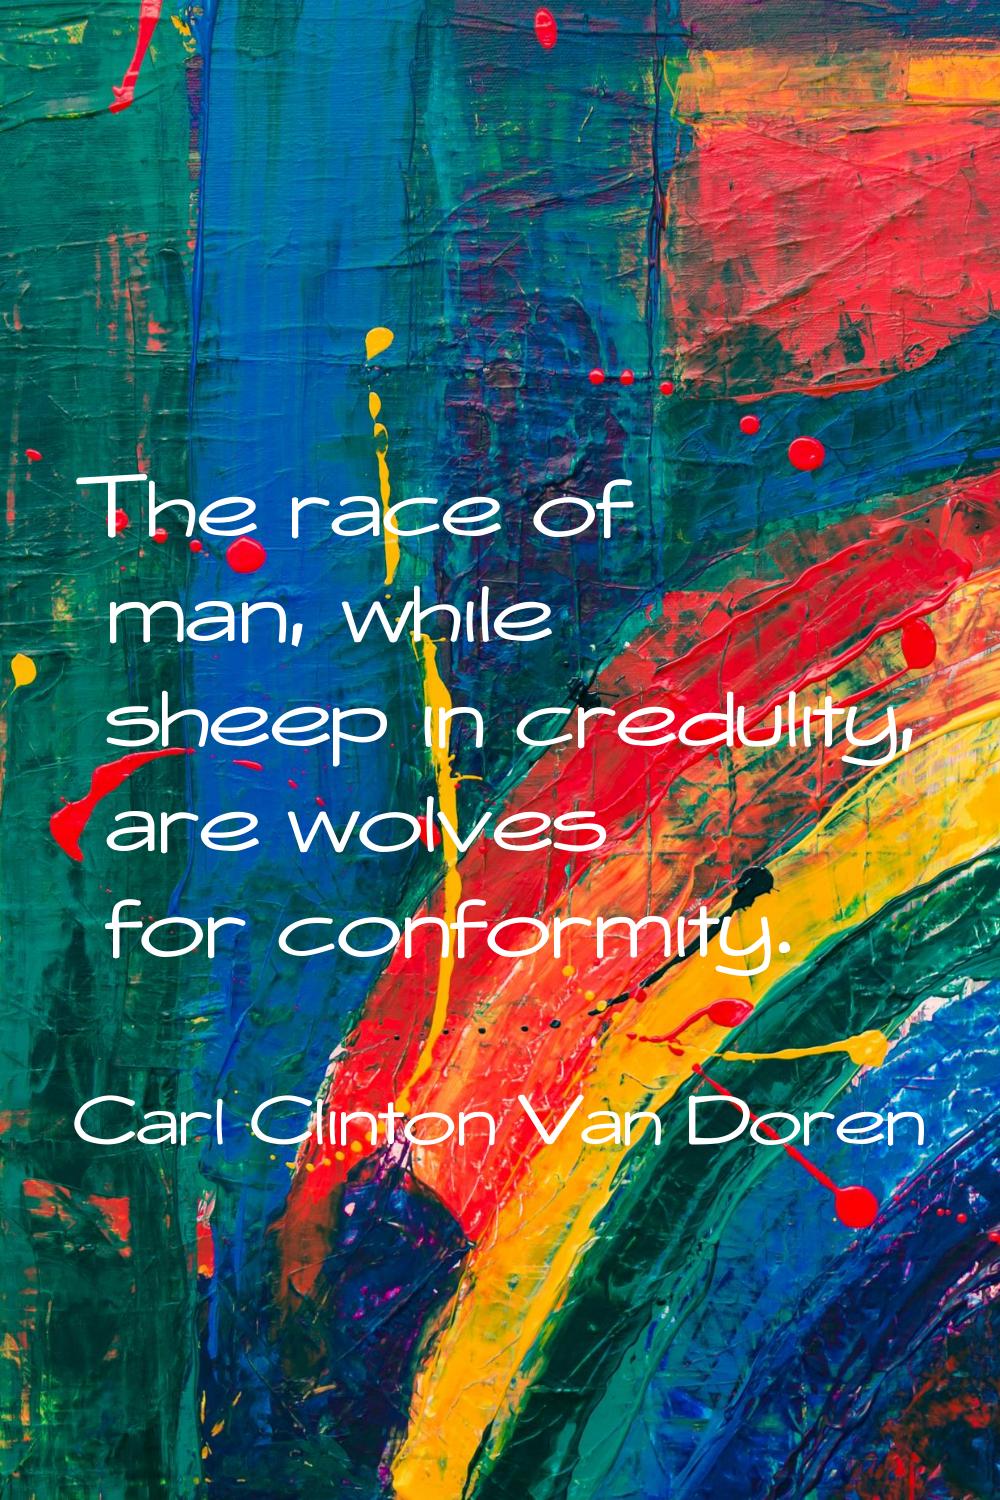 The race of man, while sheep in credulity, are wolves for conformity.